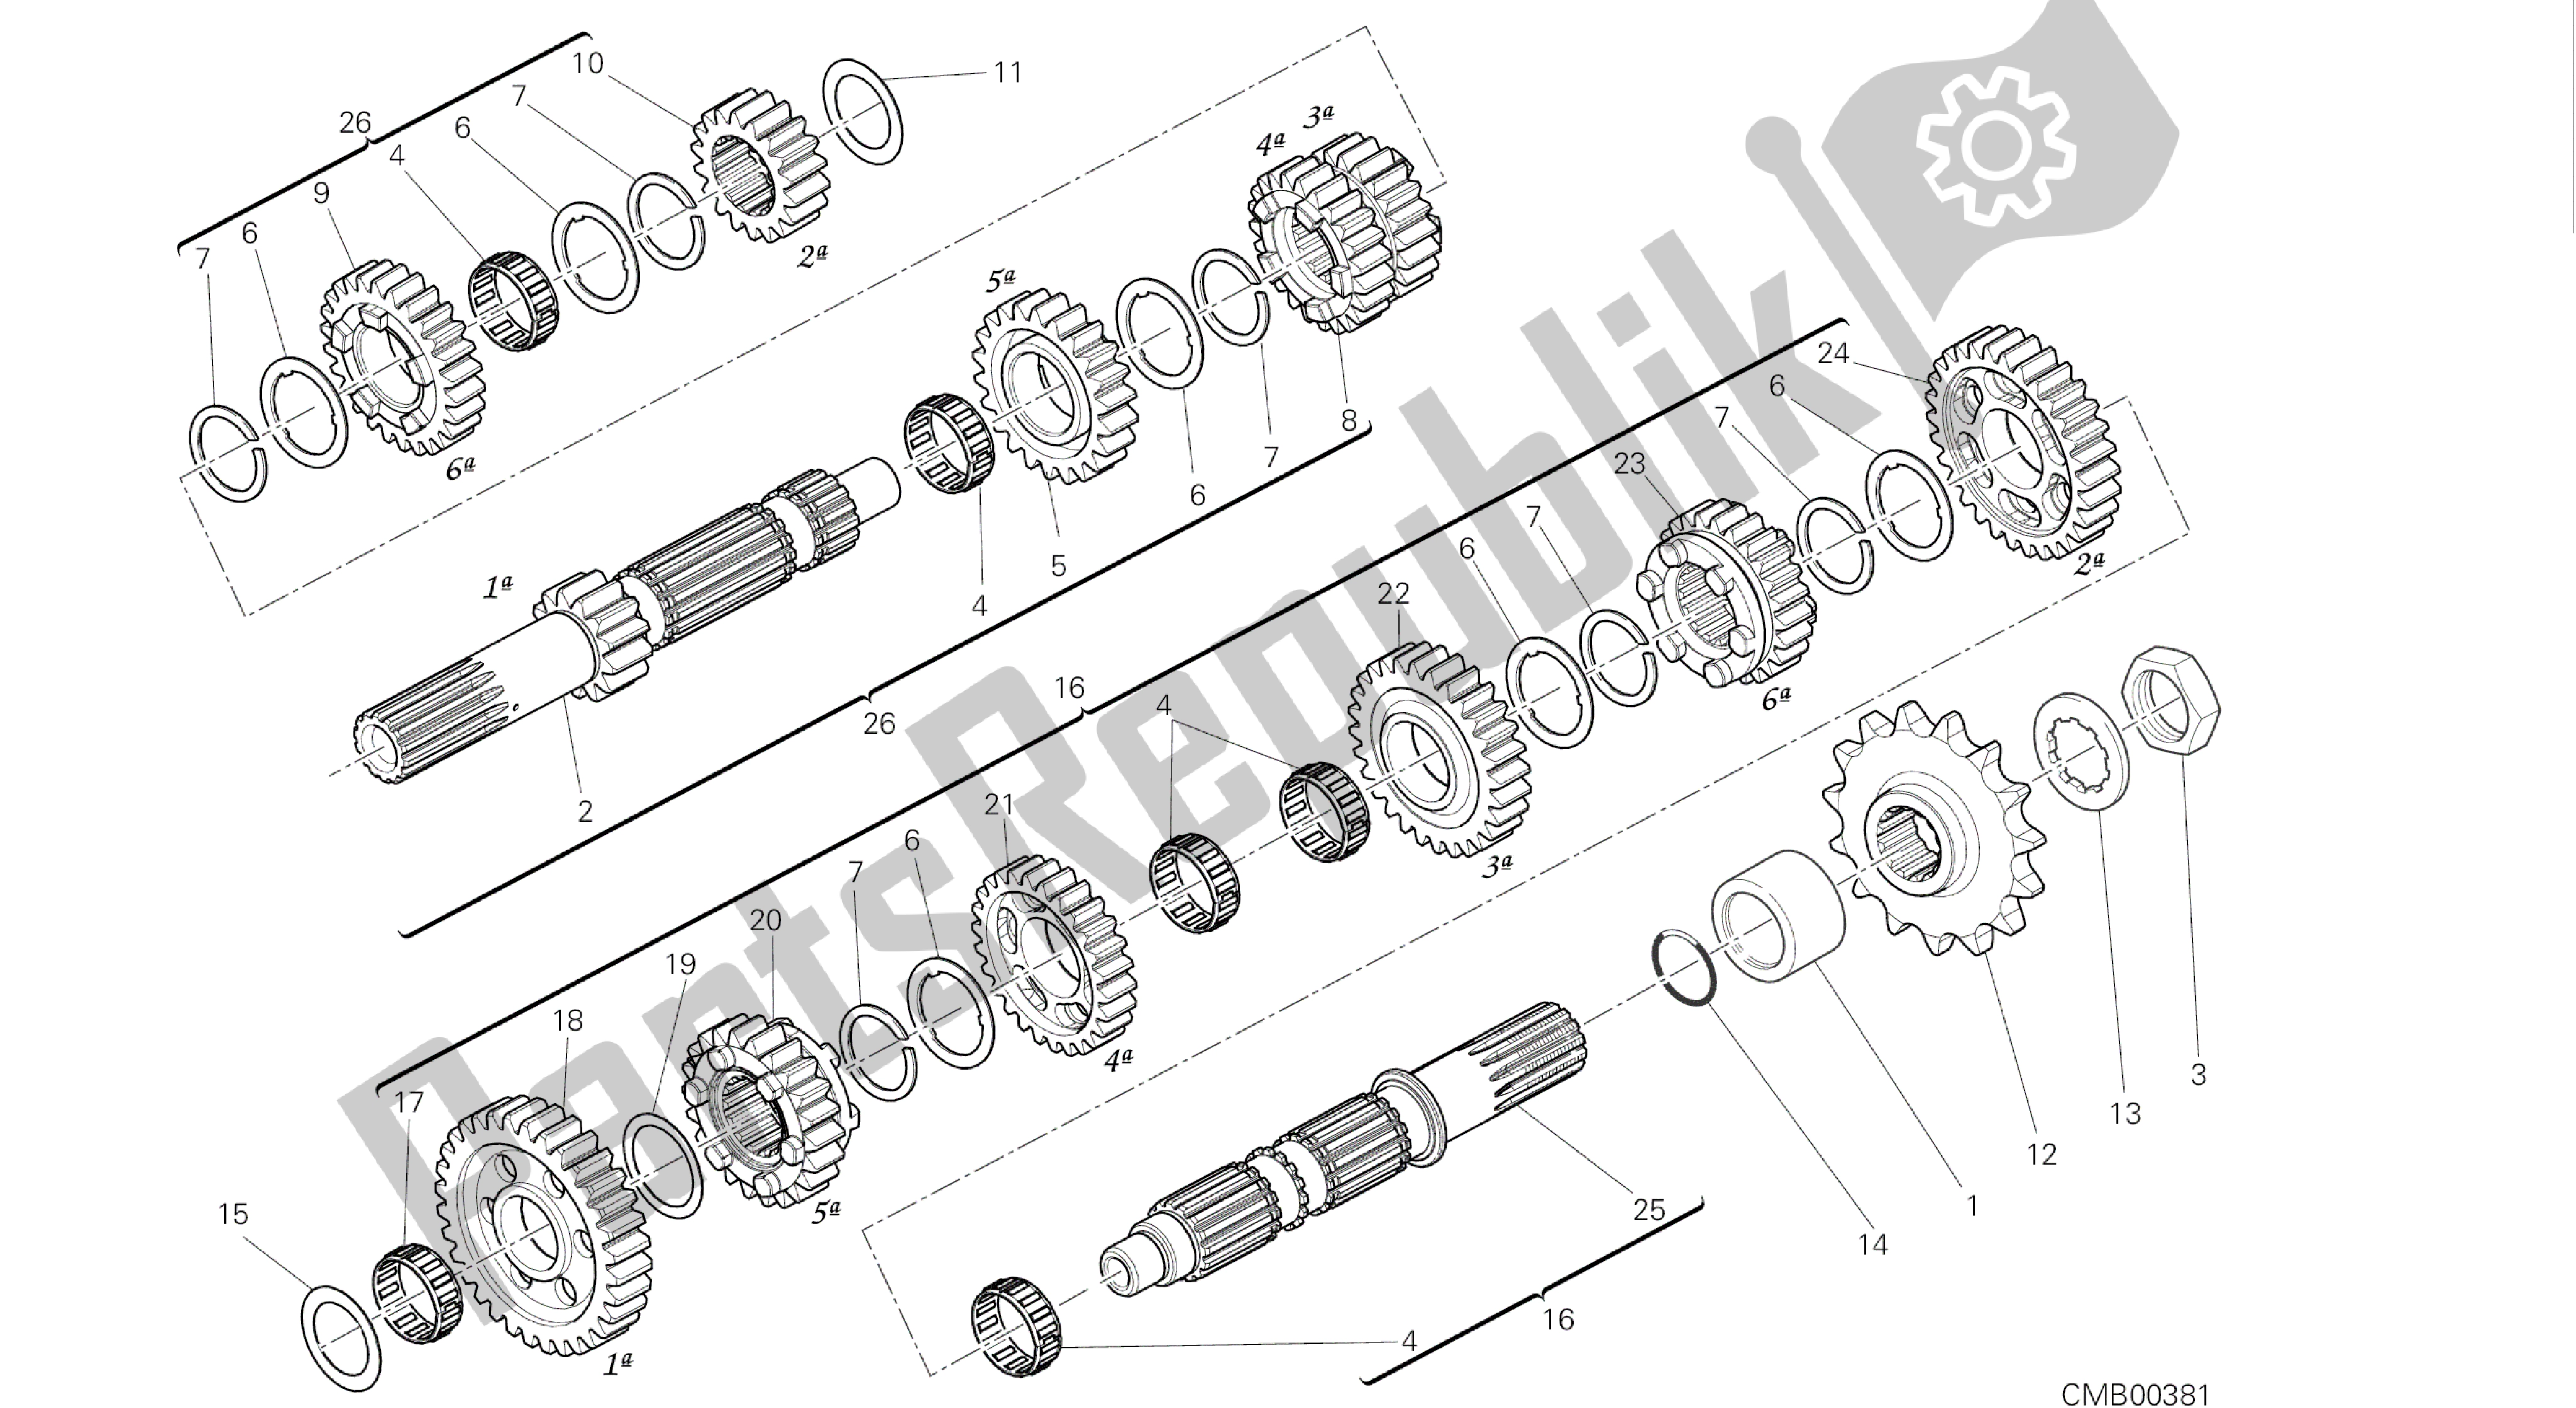 All parts for the Drawing 003 - Gear Box [mod:hym-sp;xst:aus,eur,fra,jap,twn]group Engine of the Ducati Hypermotard SP 821 2014